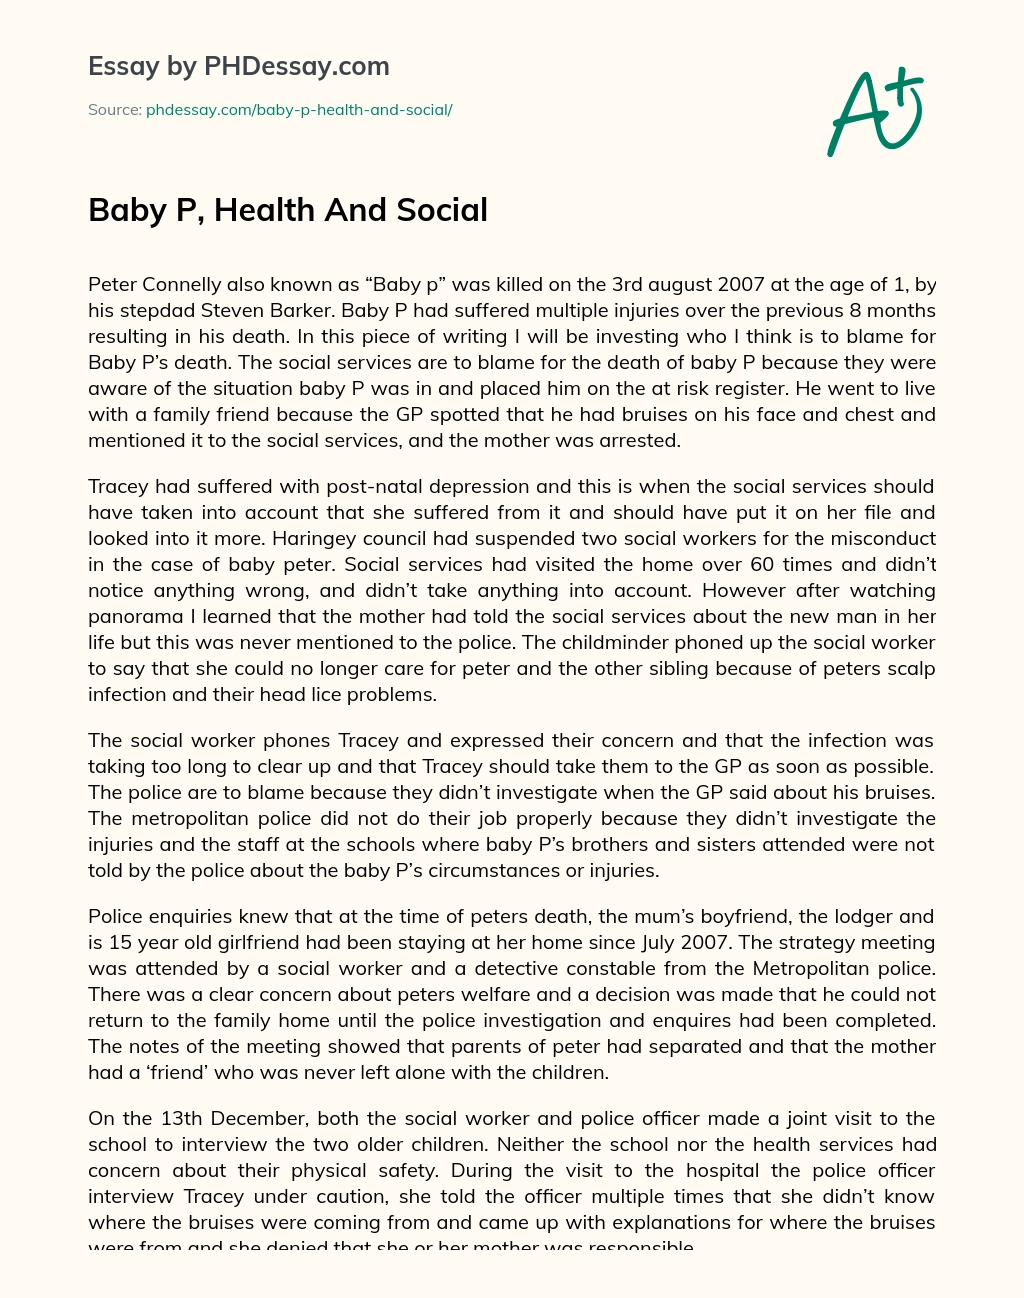 Baby P, Health And Social essay